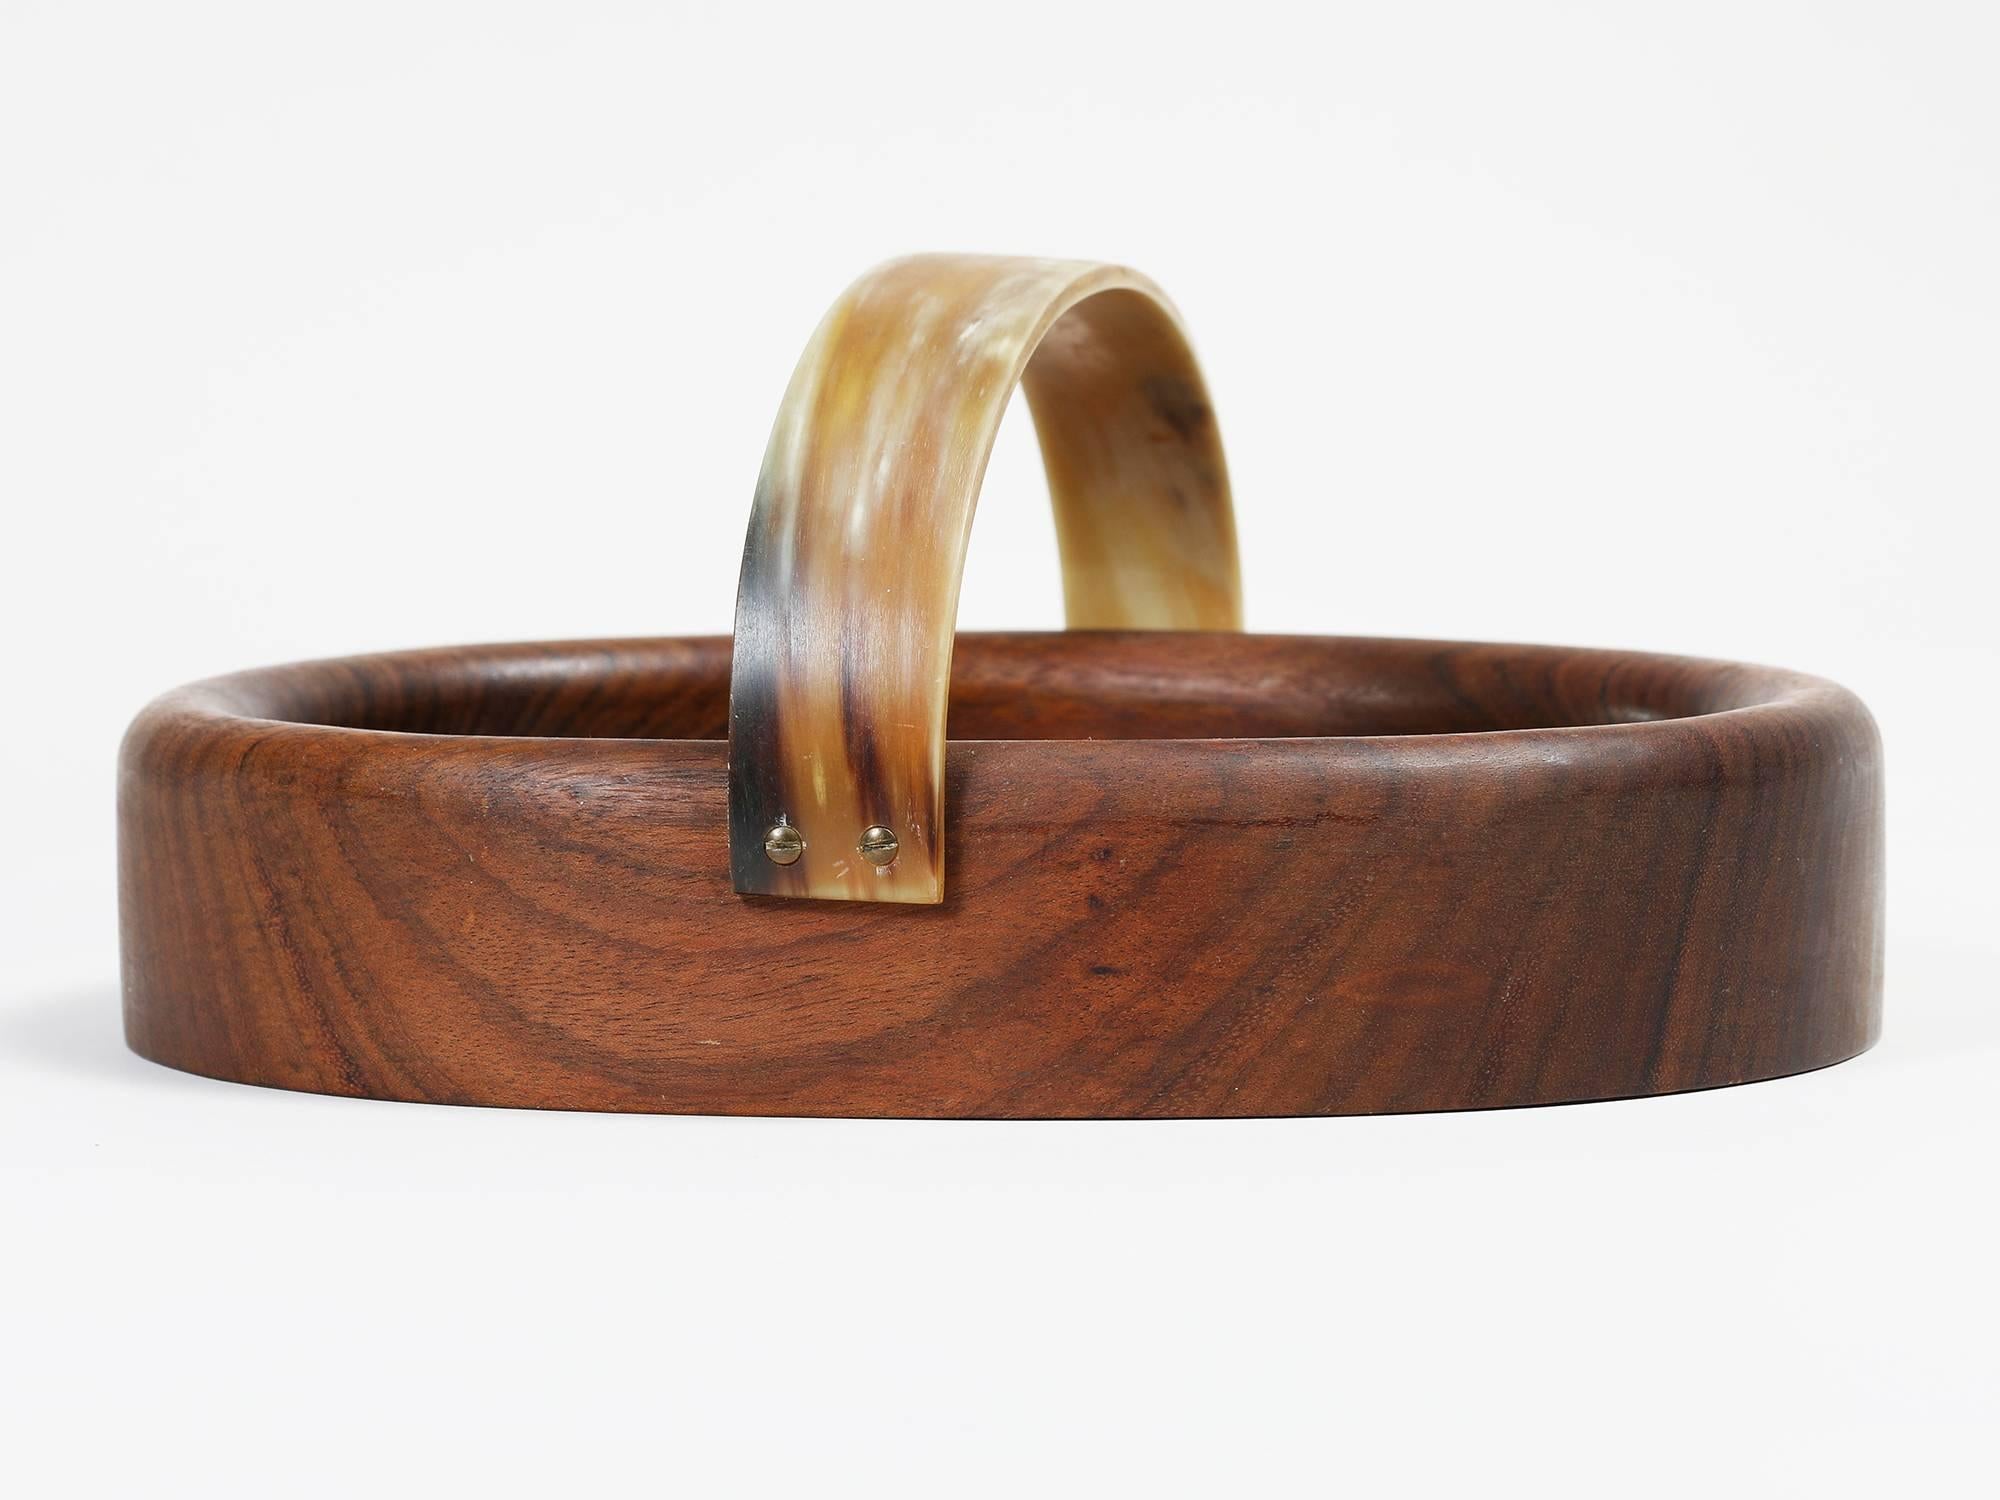 Handled bowl made of carved walnut and horn by Viennese master designer Carl Auböck.